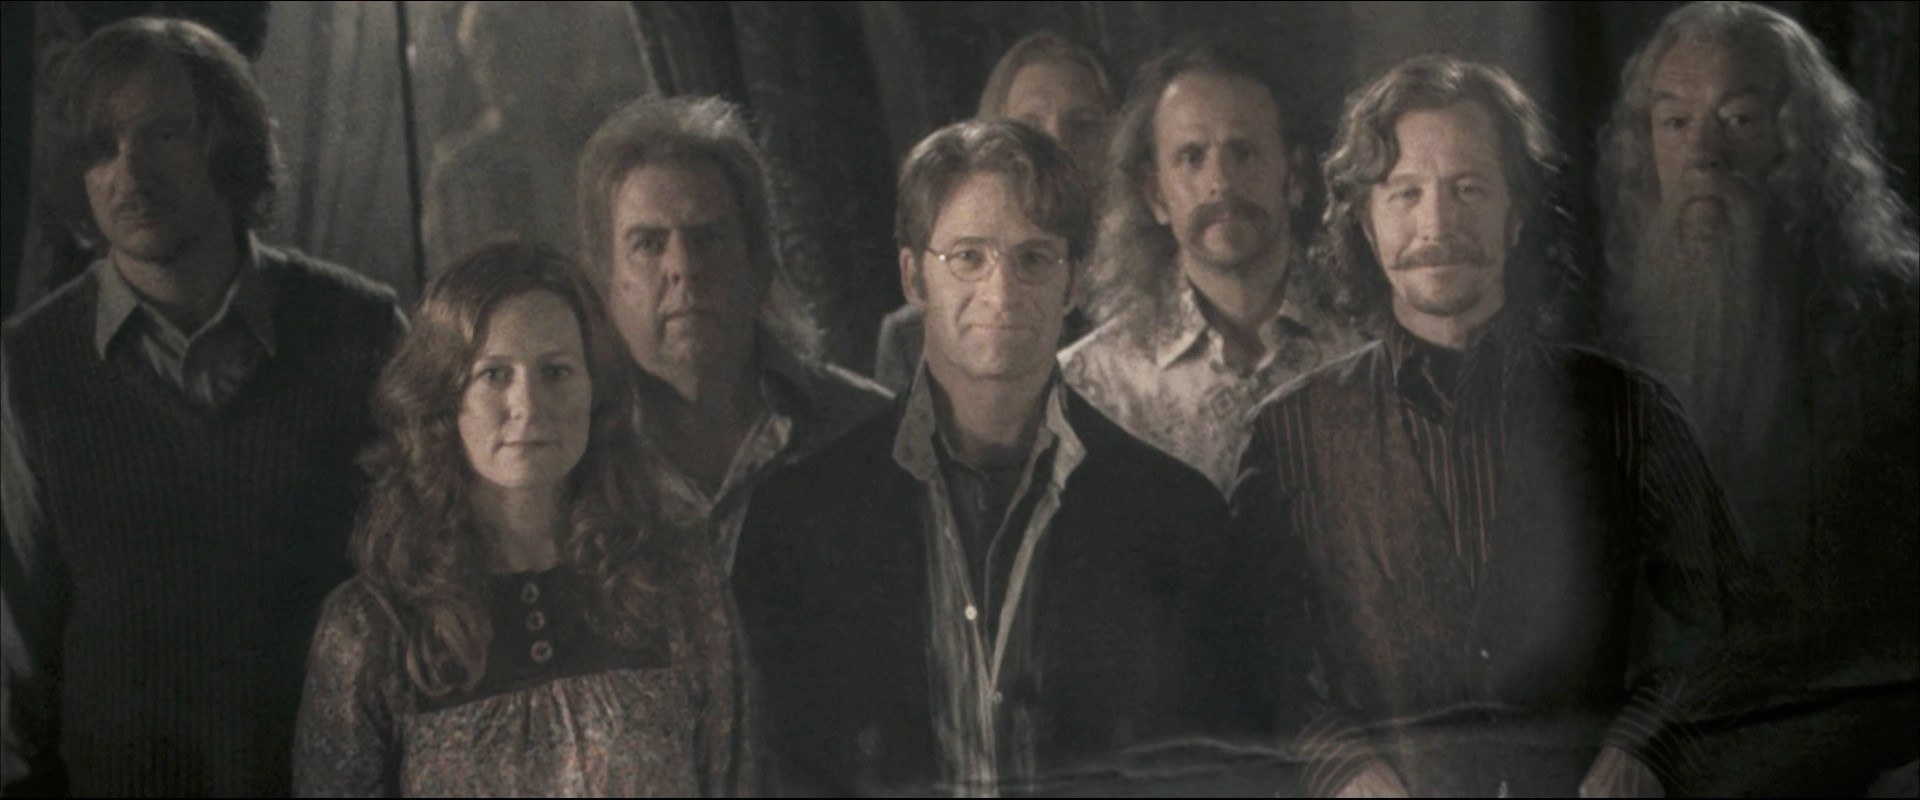 A photo of the first Order — Lily, James, Sirius, and others